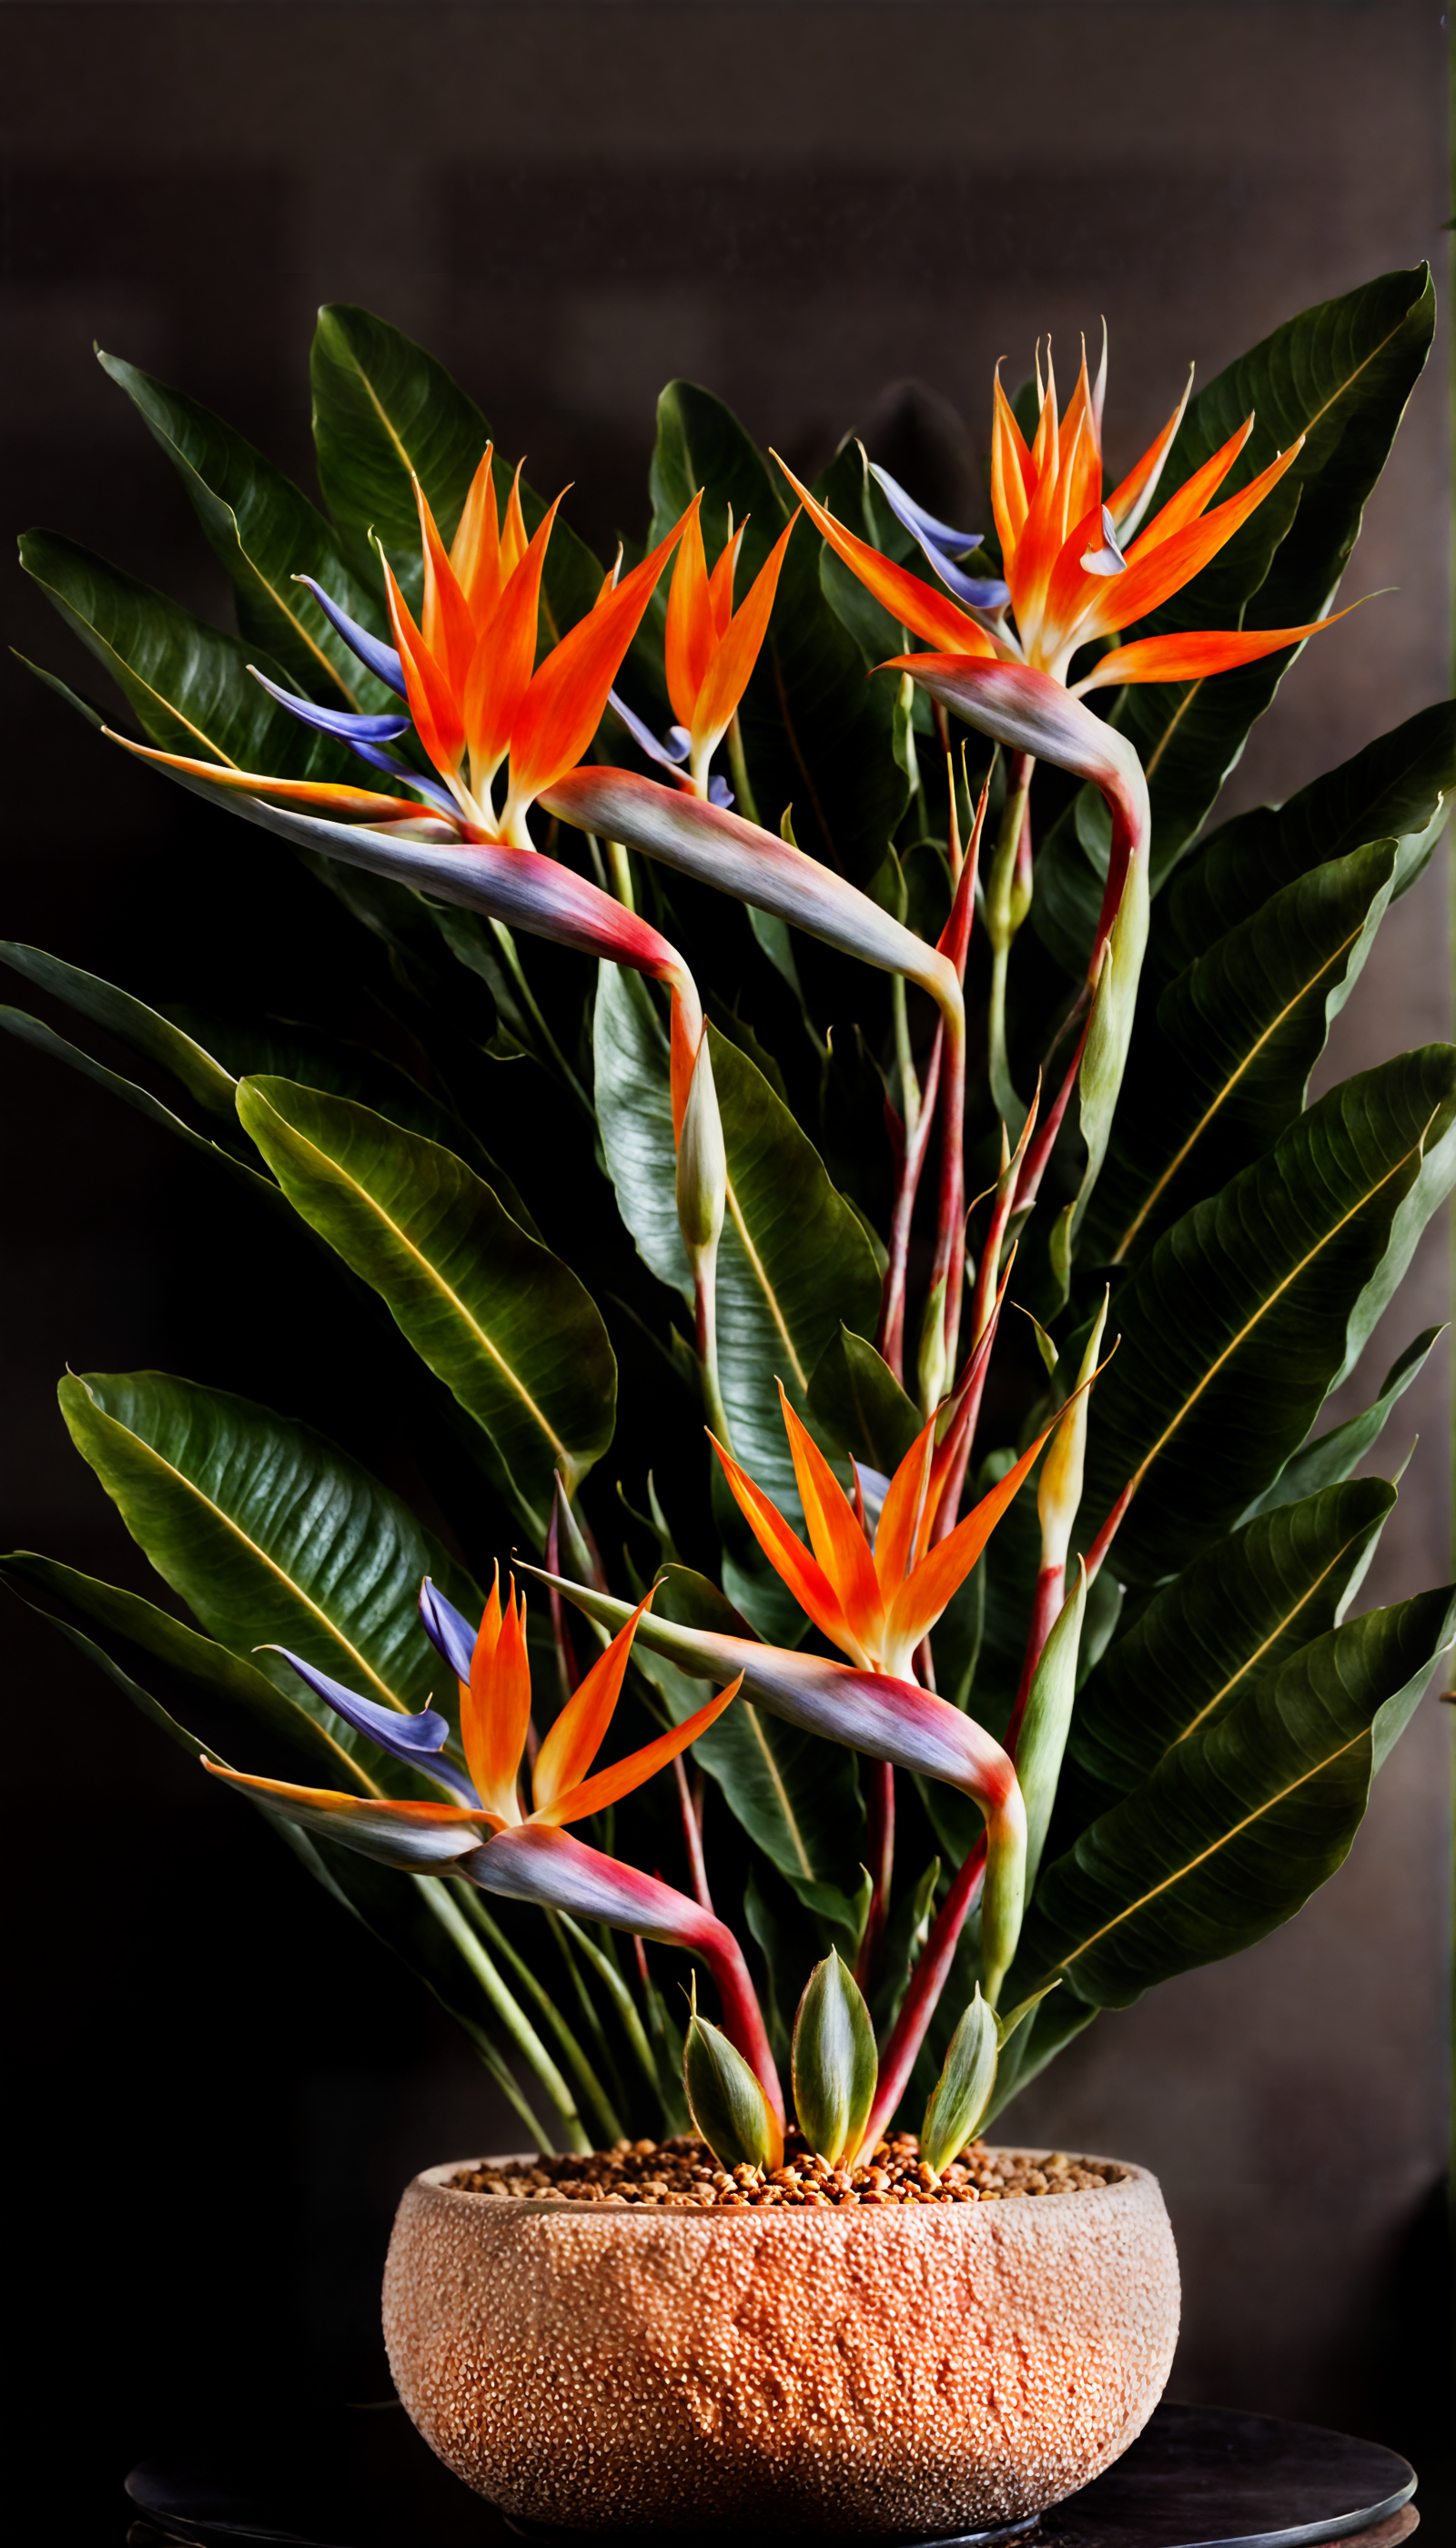 Strelitzia reginae, or Bird of Paradise, with vibrant orange and blue petals, in a bowl on a table, clear indoor lighting.